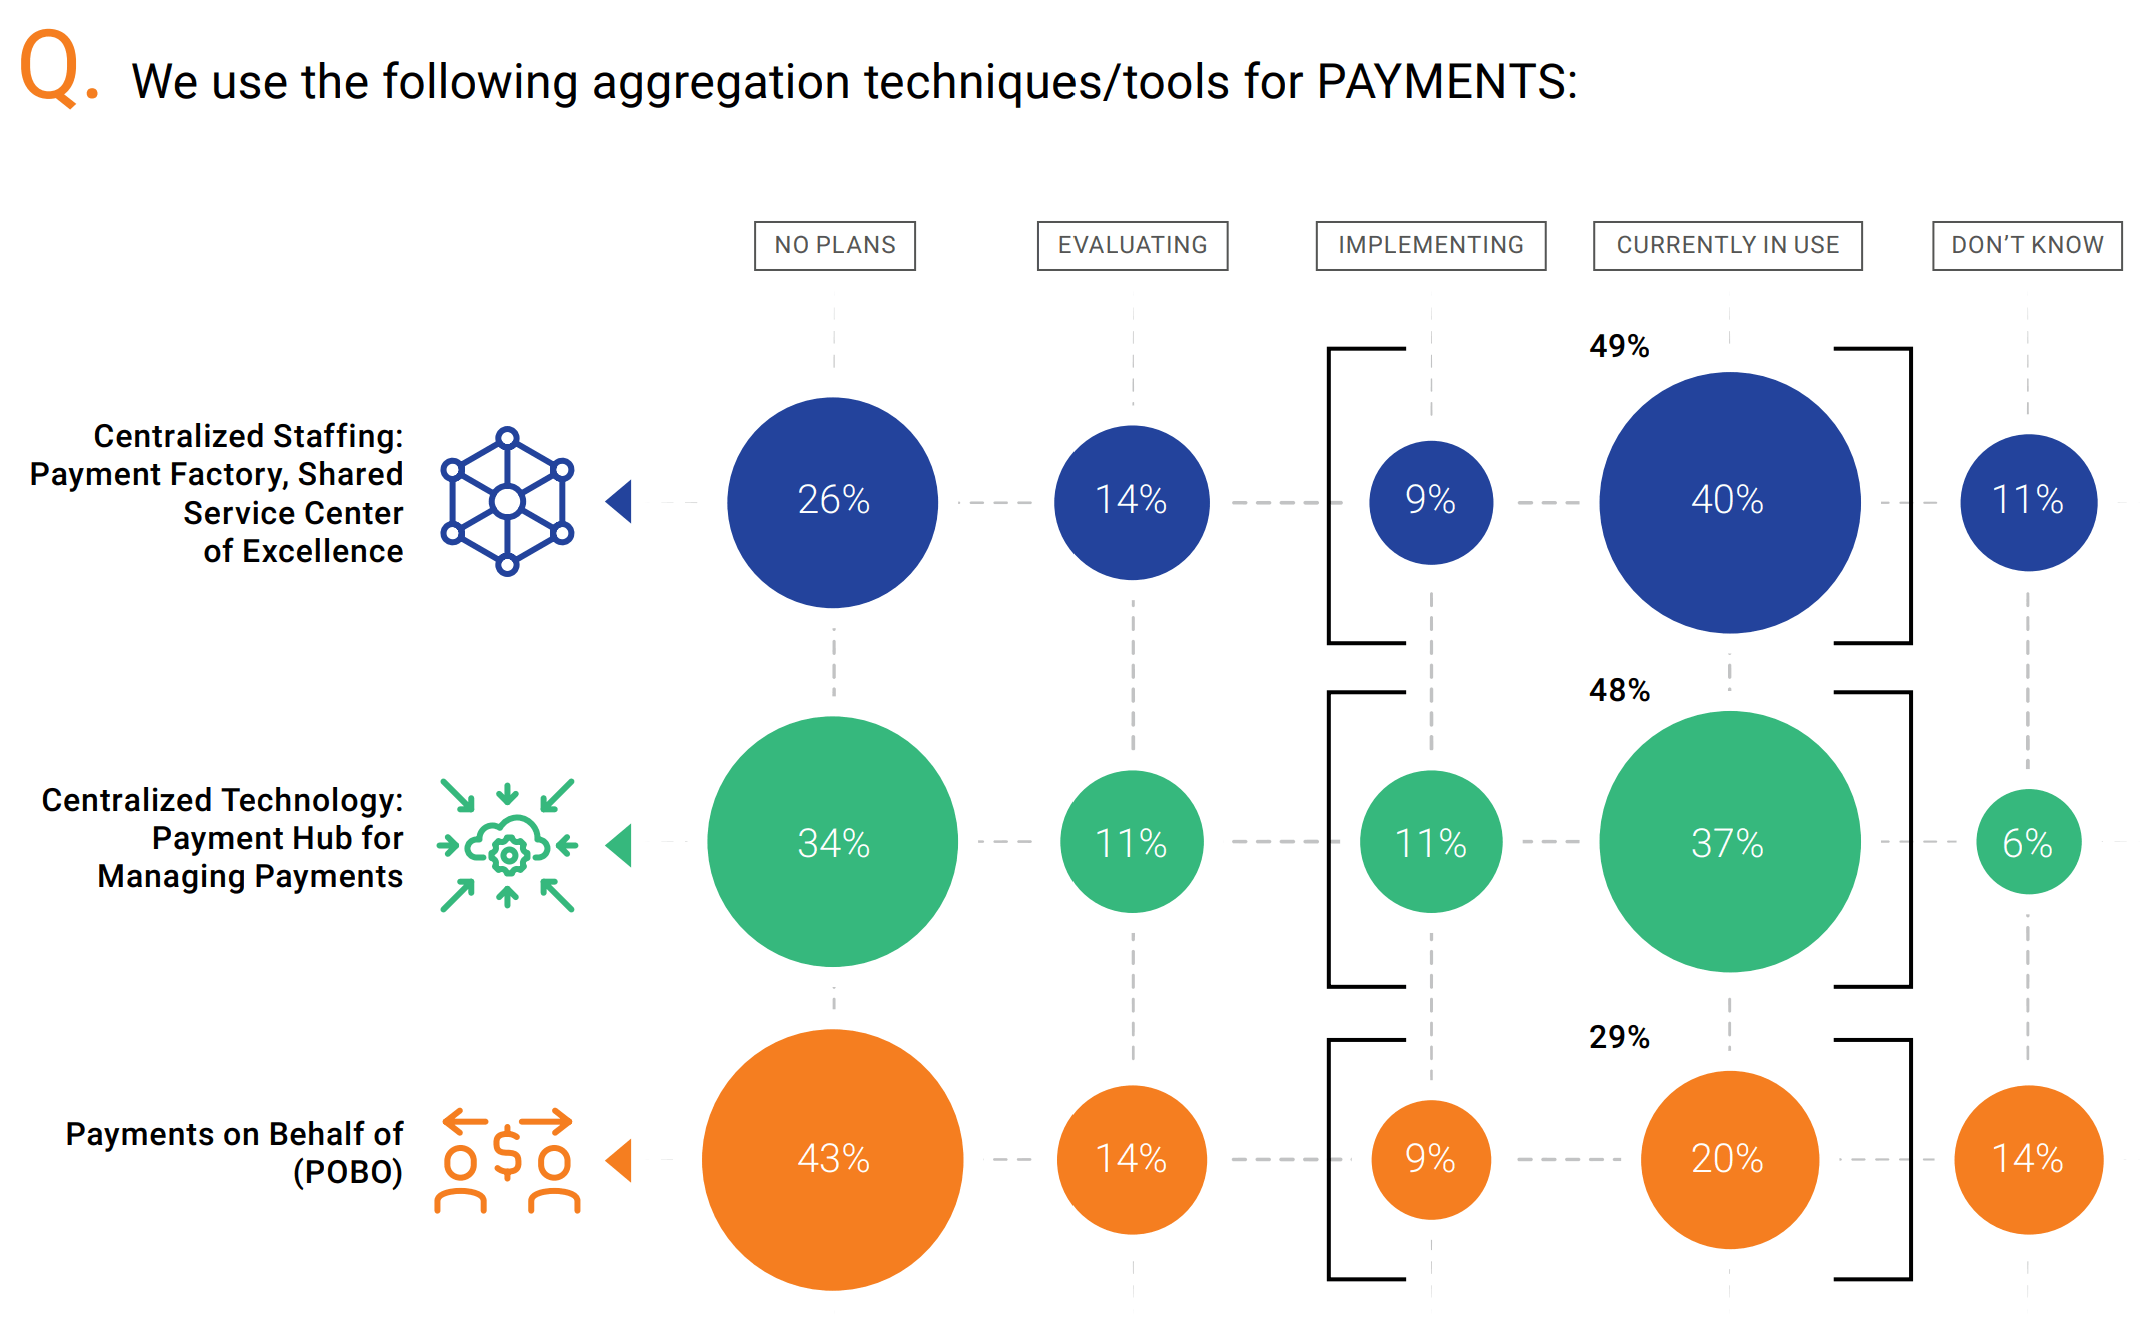 Aggregation Techniques/Tool for Payments graphic